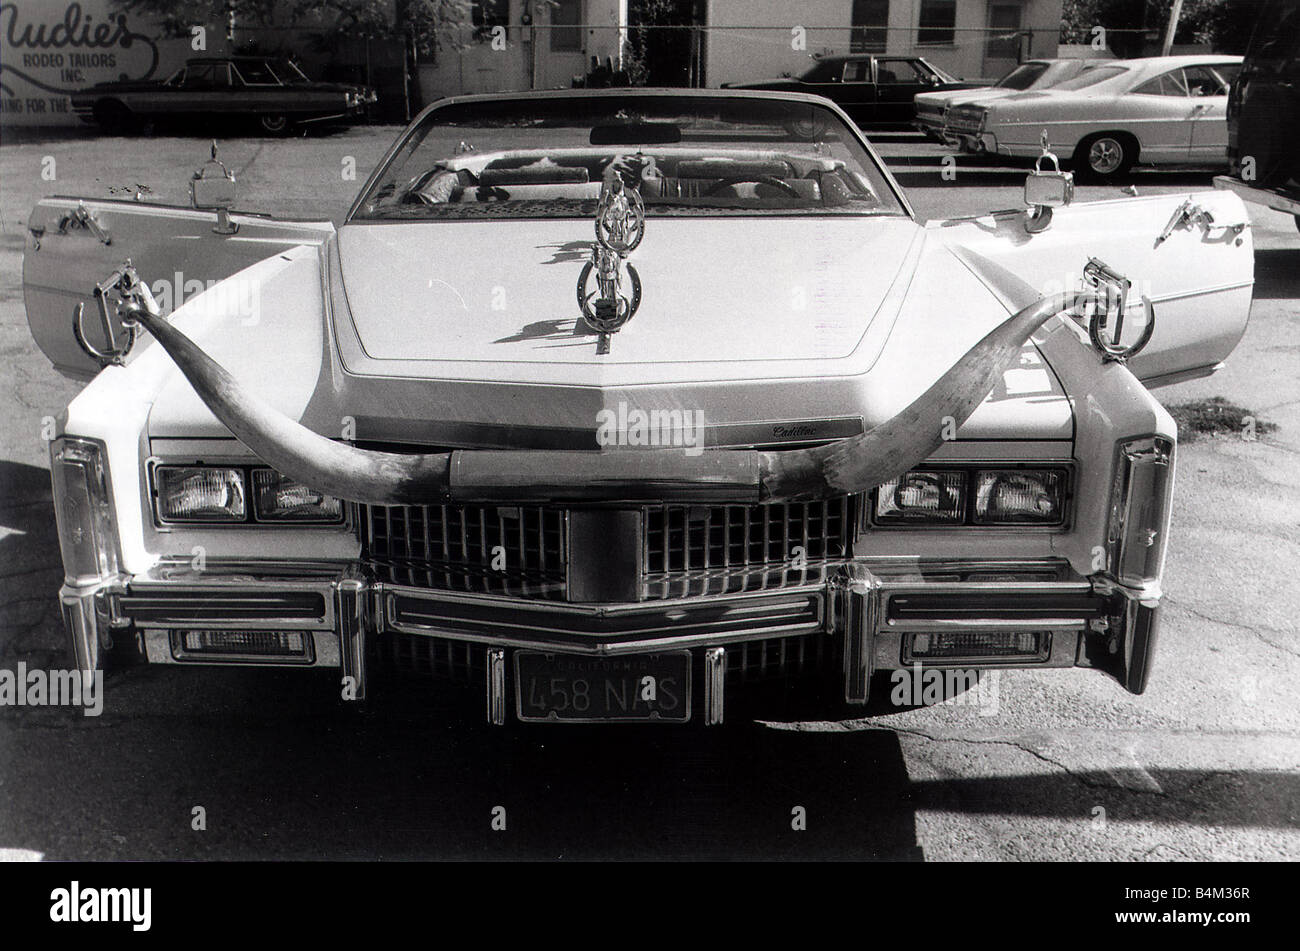 Cadillac Eldorado Convertible car Nudie the man who supplies clothes to the likes of John Wayne has turned his car in to a cowboyÍs tribute On the grill he has attached a pair of Longhorns Cow horns Horse shoes Guns Pistols Colt 45 s Stock Photo